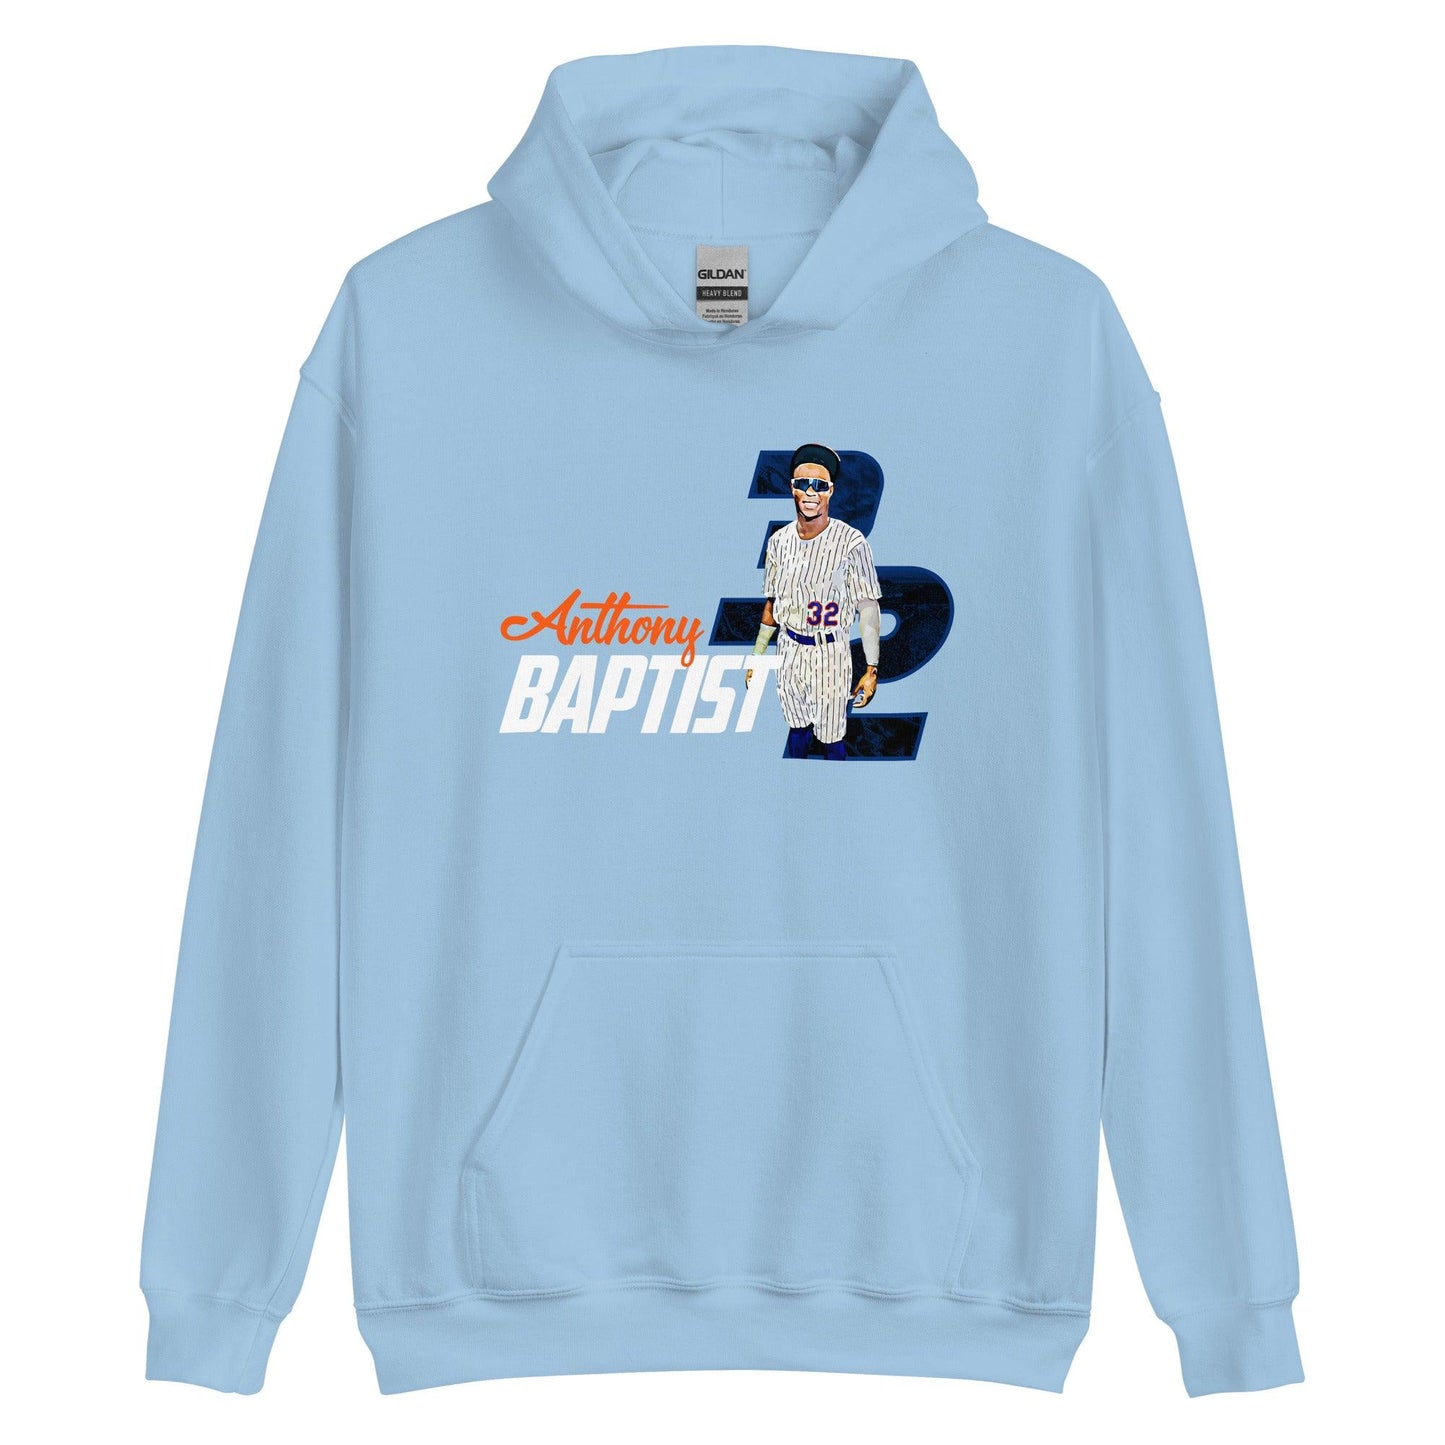 Anthony Baptist "Gameday" Hoodie - Fan Arch